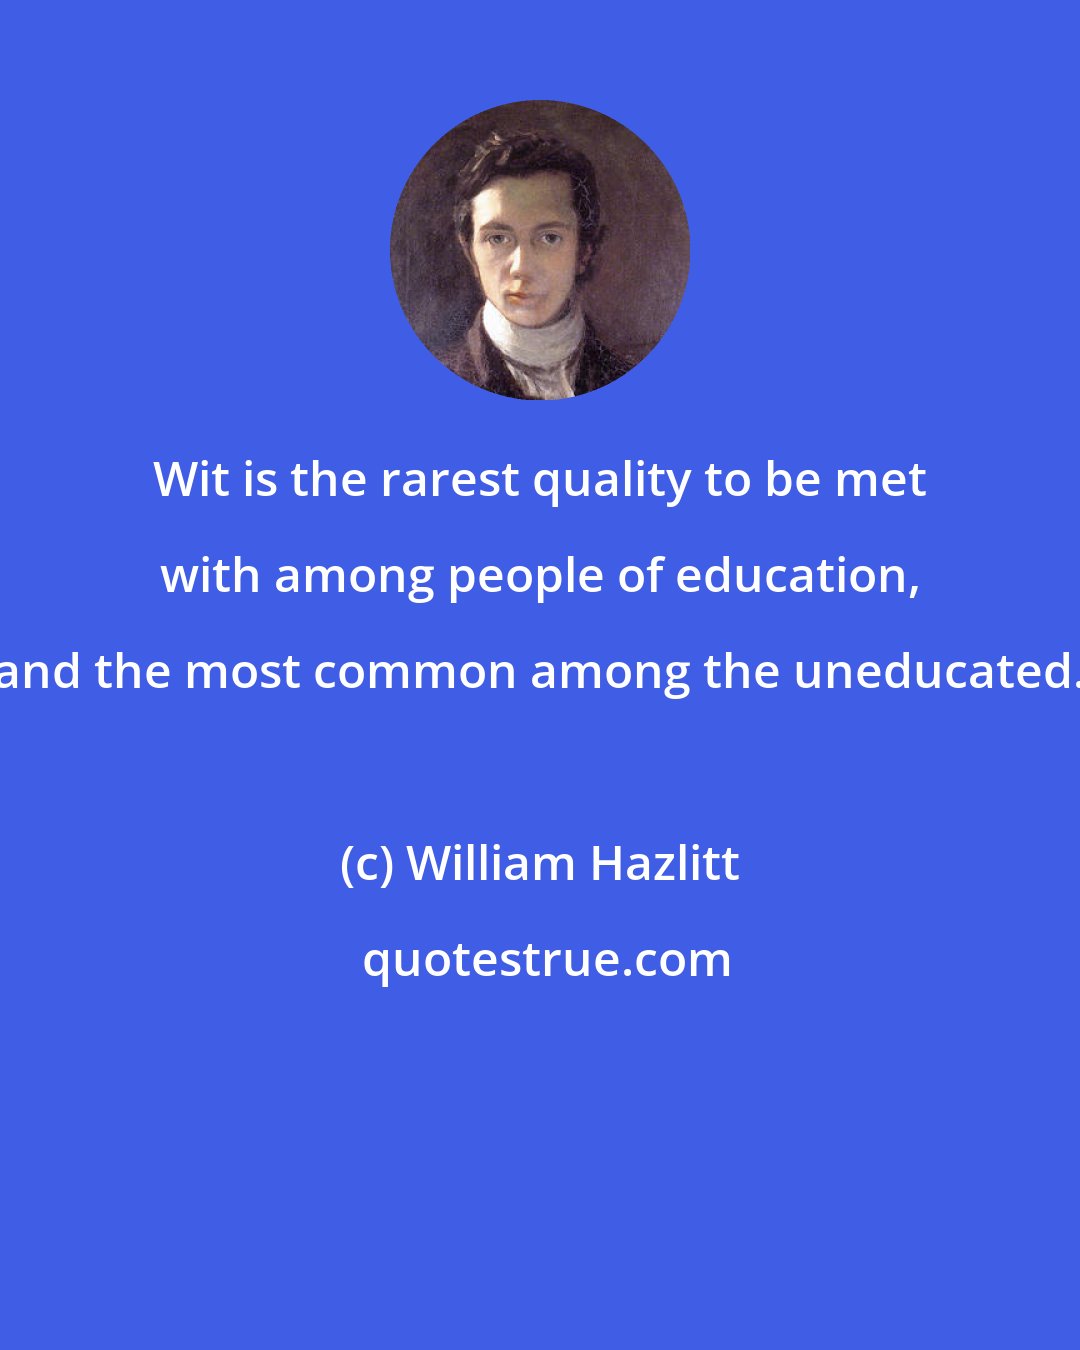 William Hazlitt: Wit is the rarest quality to be met with among people of education, and the most common among the uneducated.